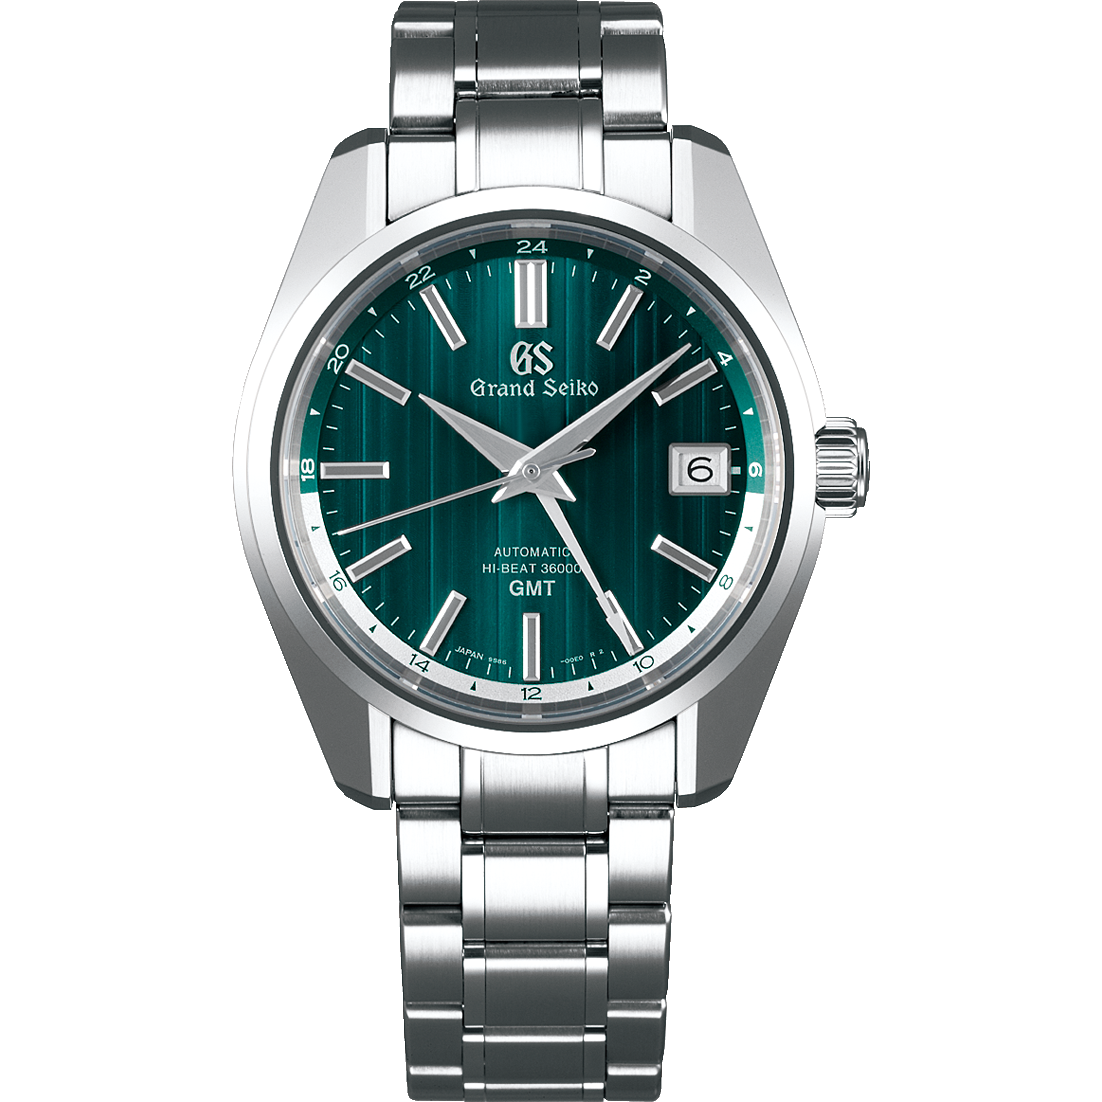 HANDS ON: the Grand Seiko SBGJ241 Limited Edition